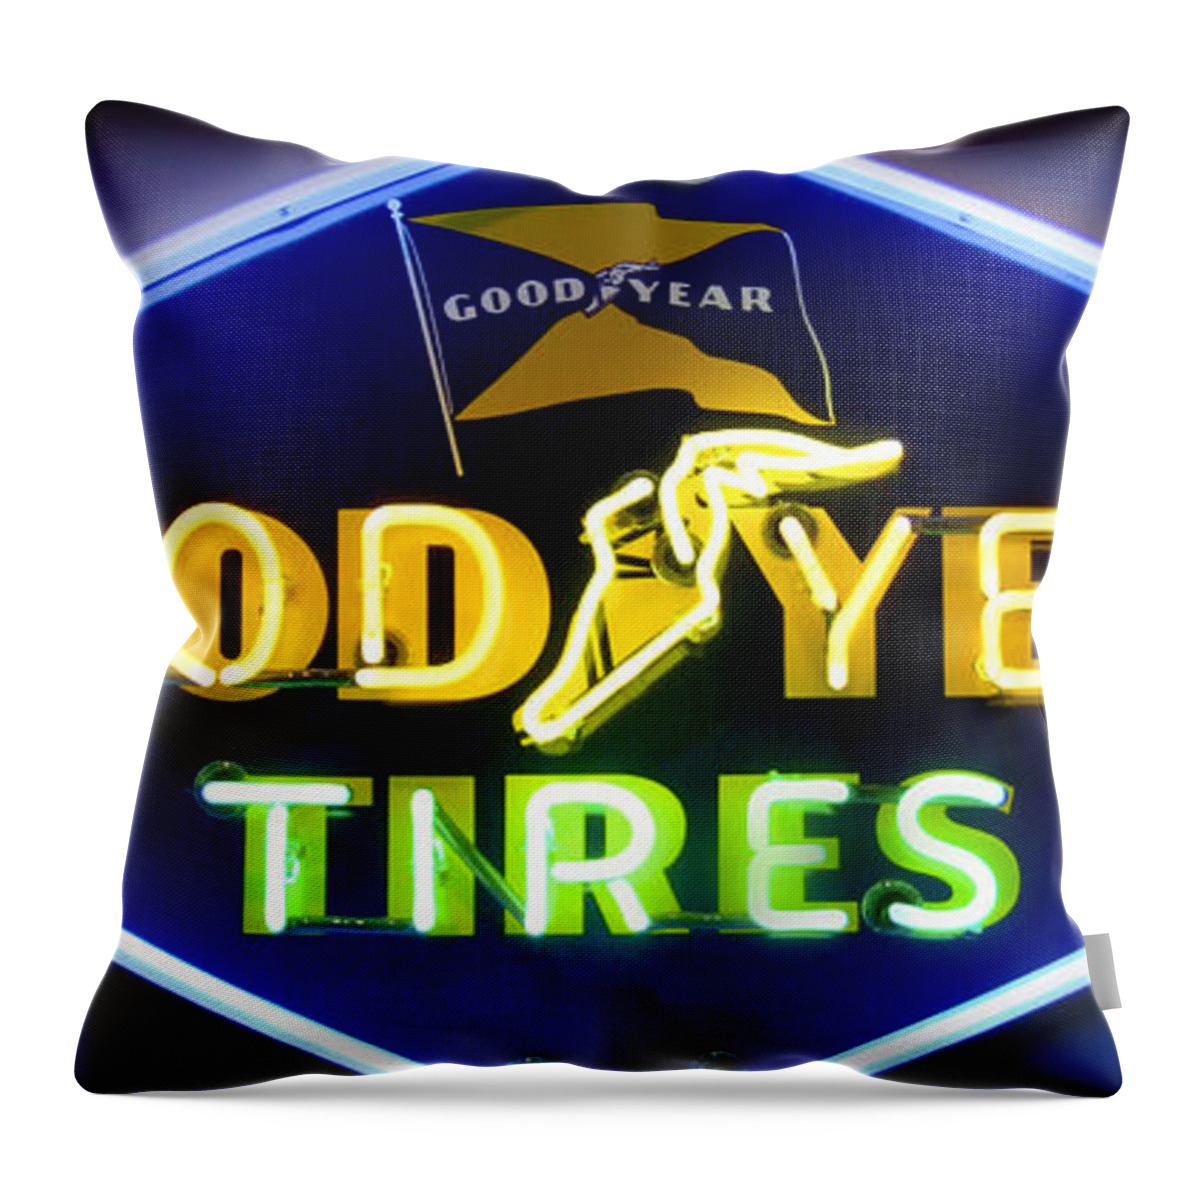 Transportation Throw Pillow featuring the photograph Neon Goodyear Tires Sign by Mike McGlothlen